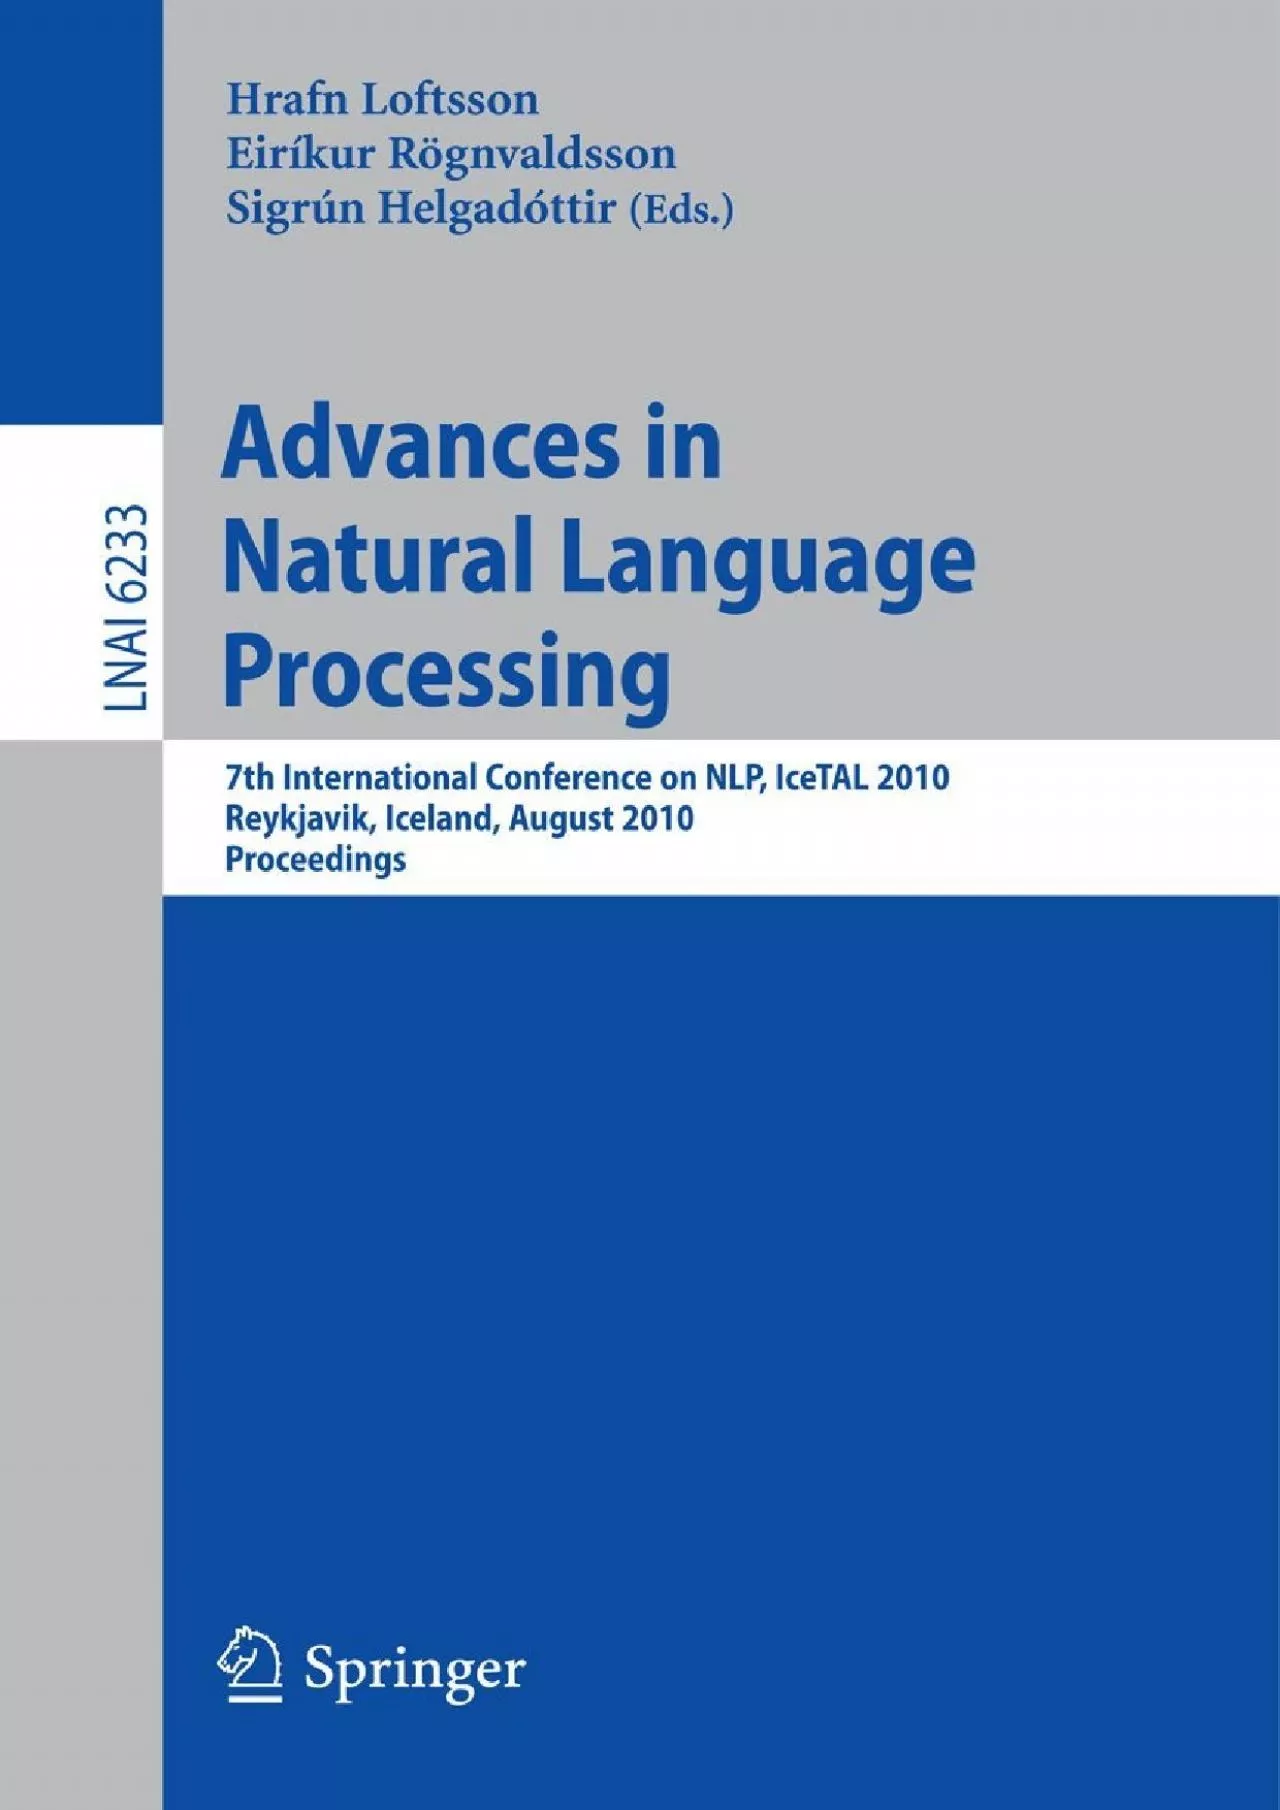 [DOWLOAD]-Advances in Natural Language Processing: 7th International Conference on NLP,